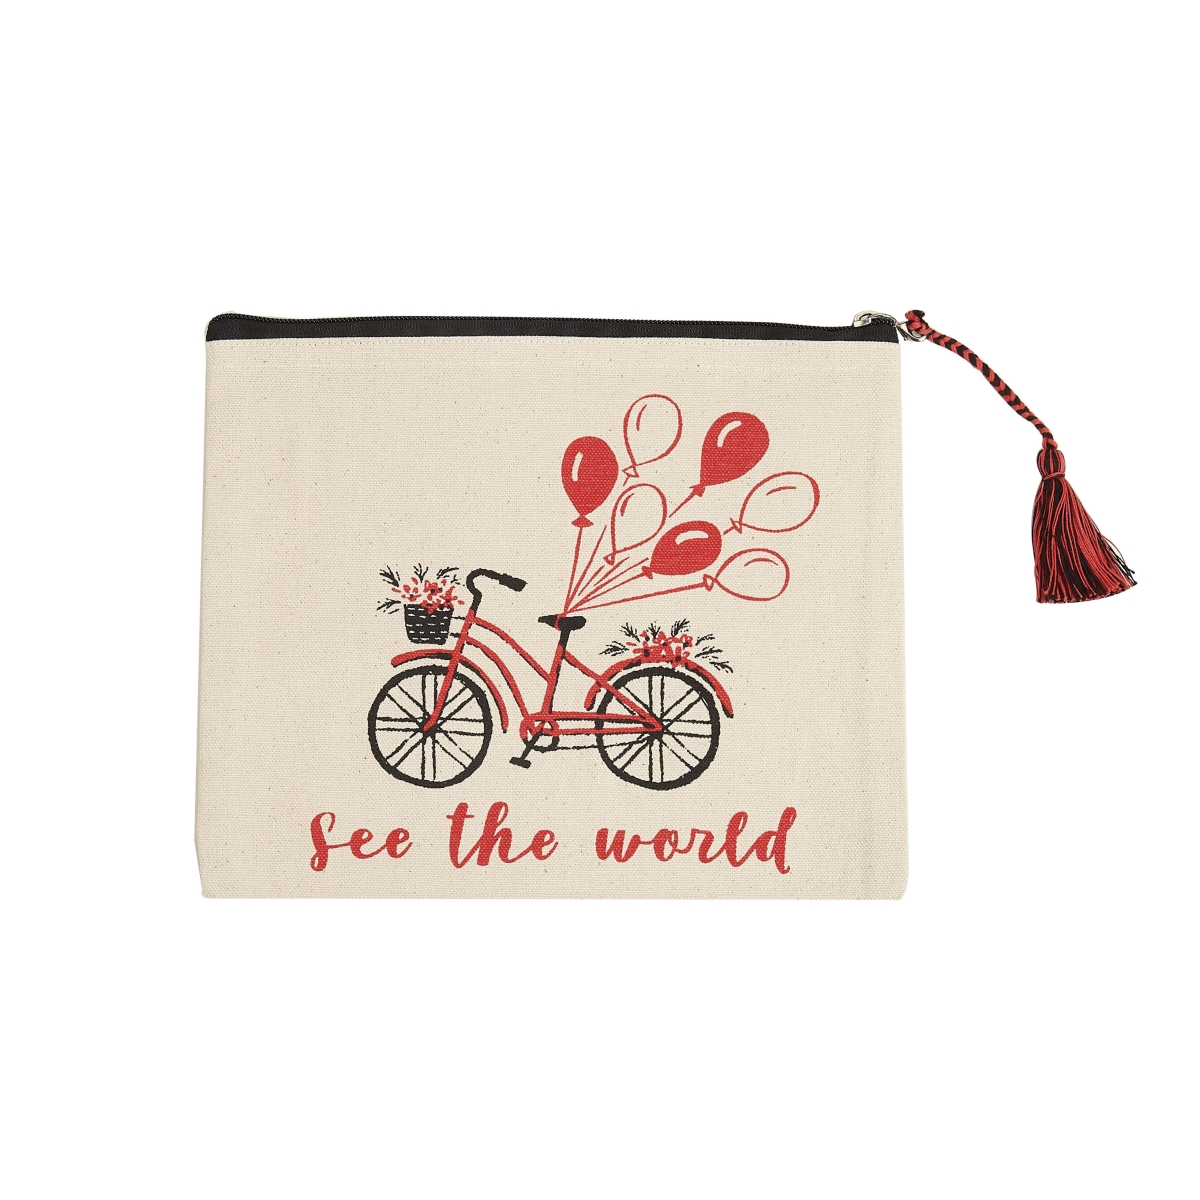 Picture of Peking Handicraft 19JES1107C 10 x 8 in. See the World Bike 1 Design Pouch, Set of 6